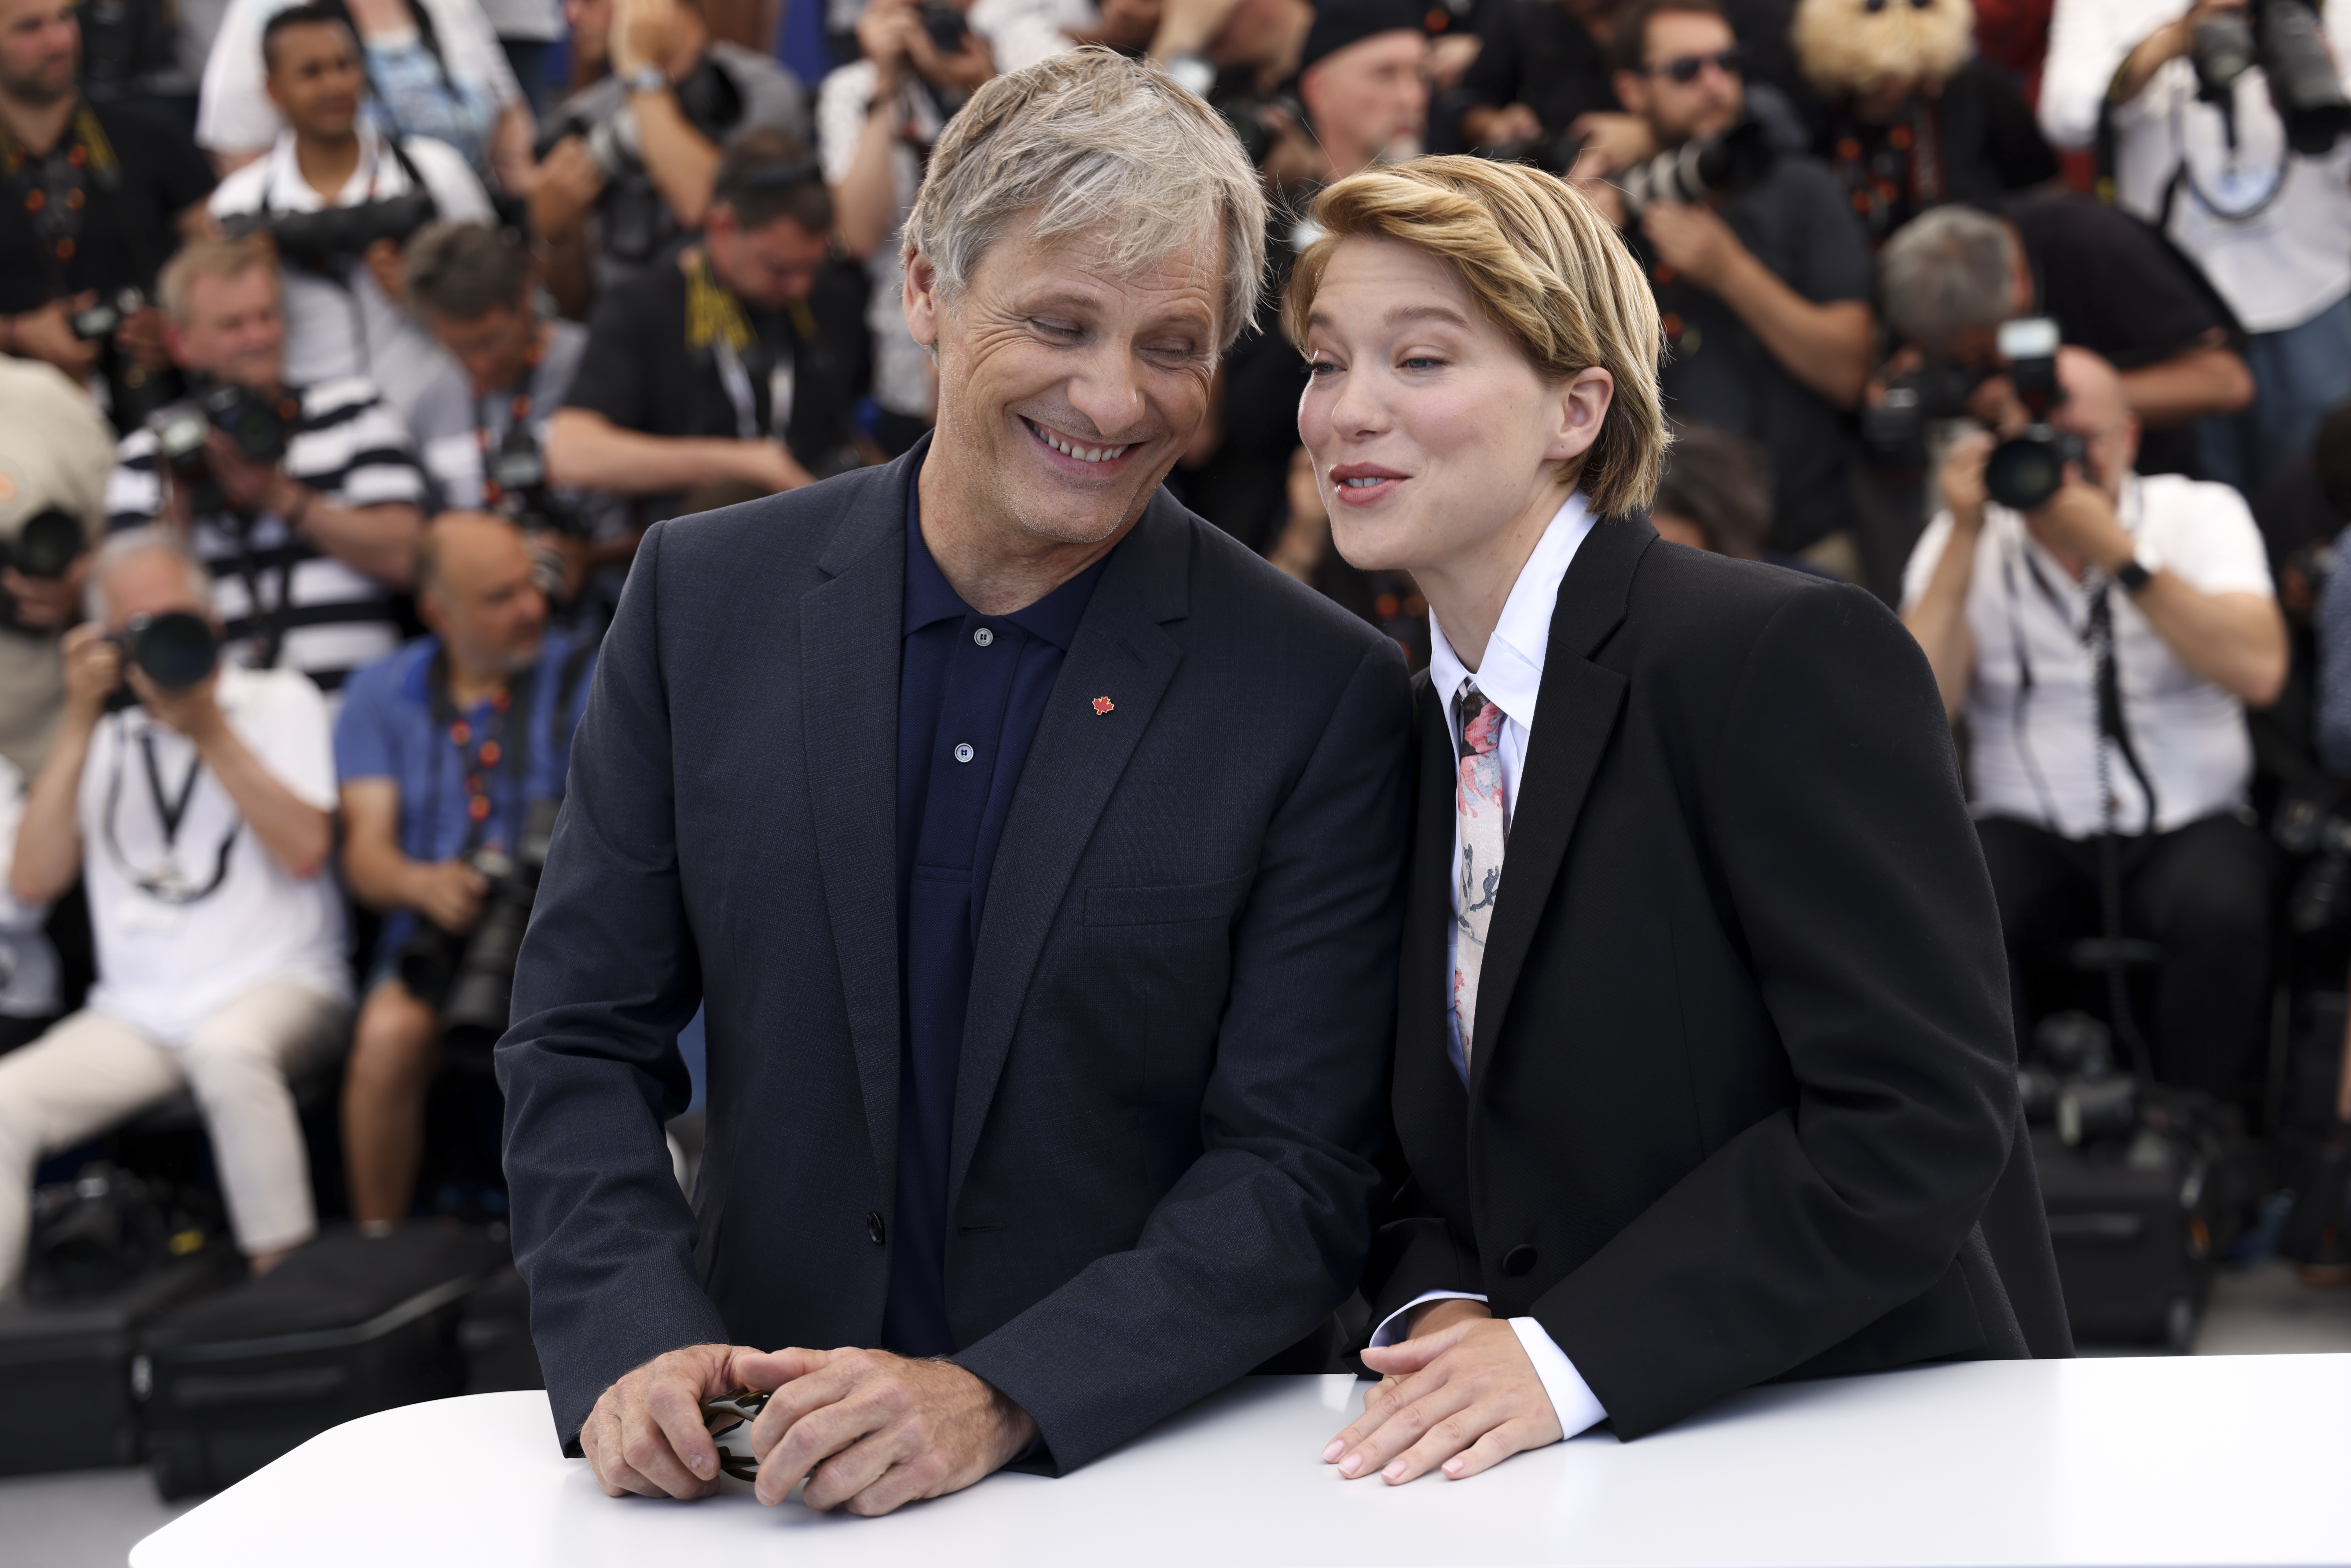 CANNES 2022 STAR LEA SEYDOUX'S INTERVIEW FROM CRASH 51